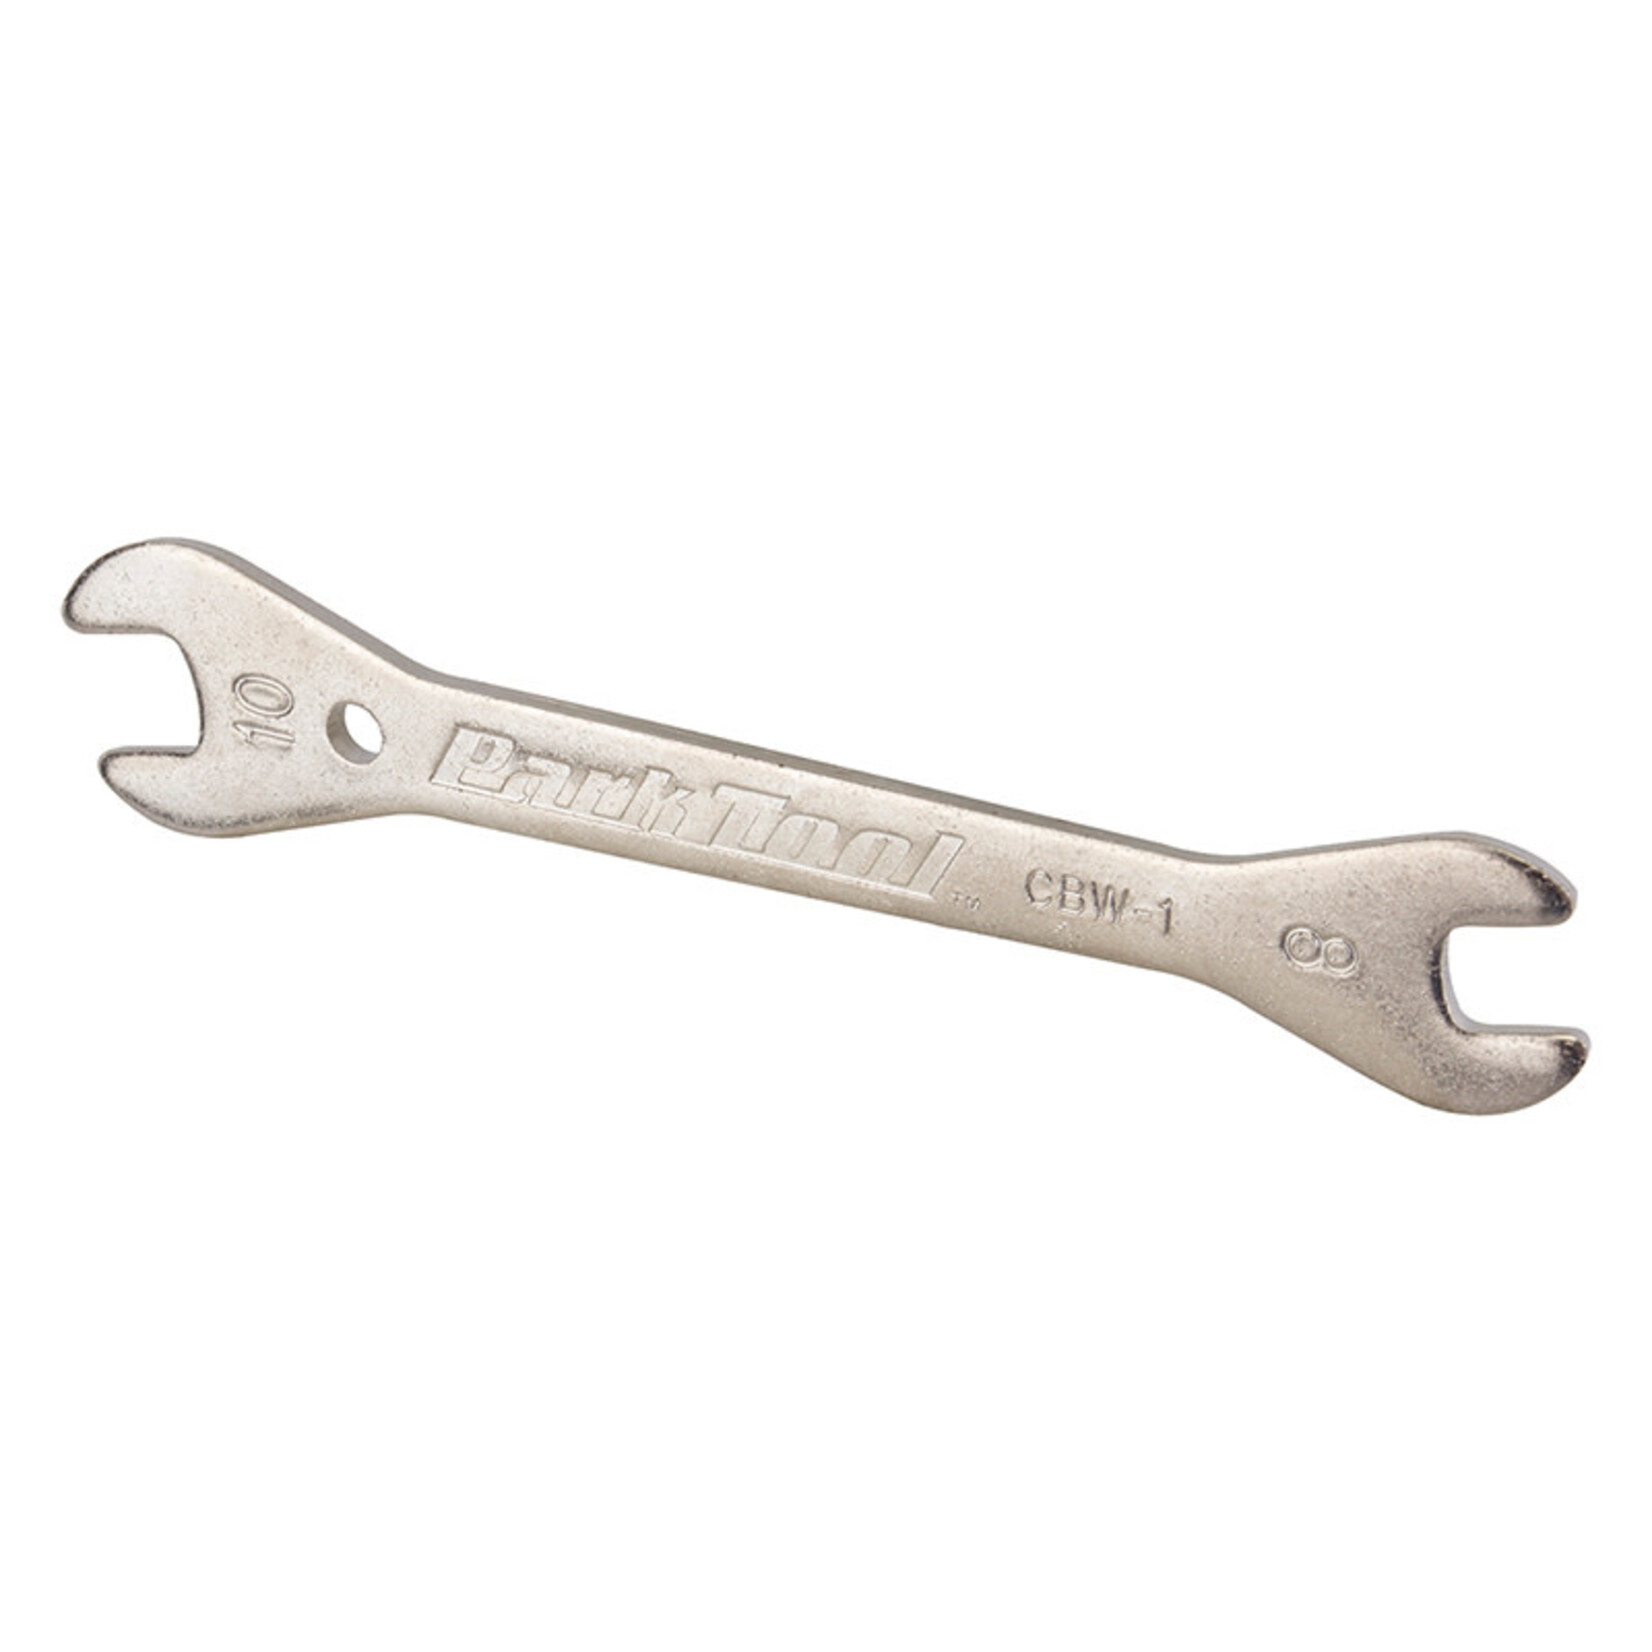 PARK TOOL Metric Wrench:  8mm, 10mm open end